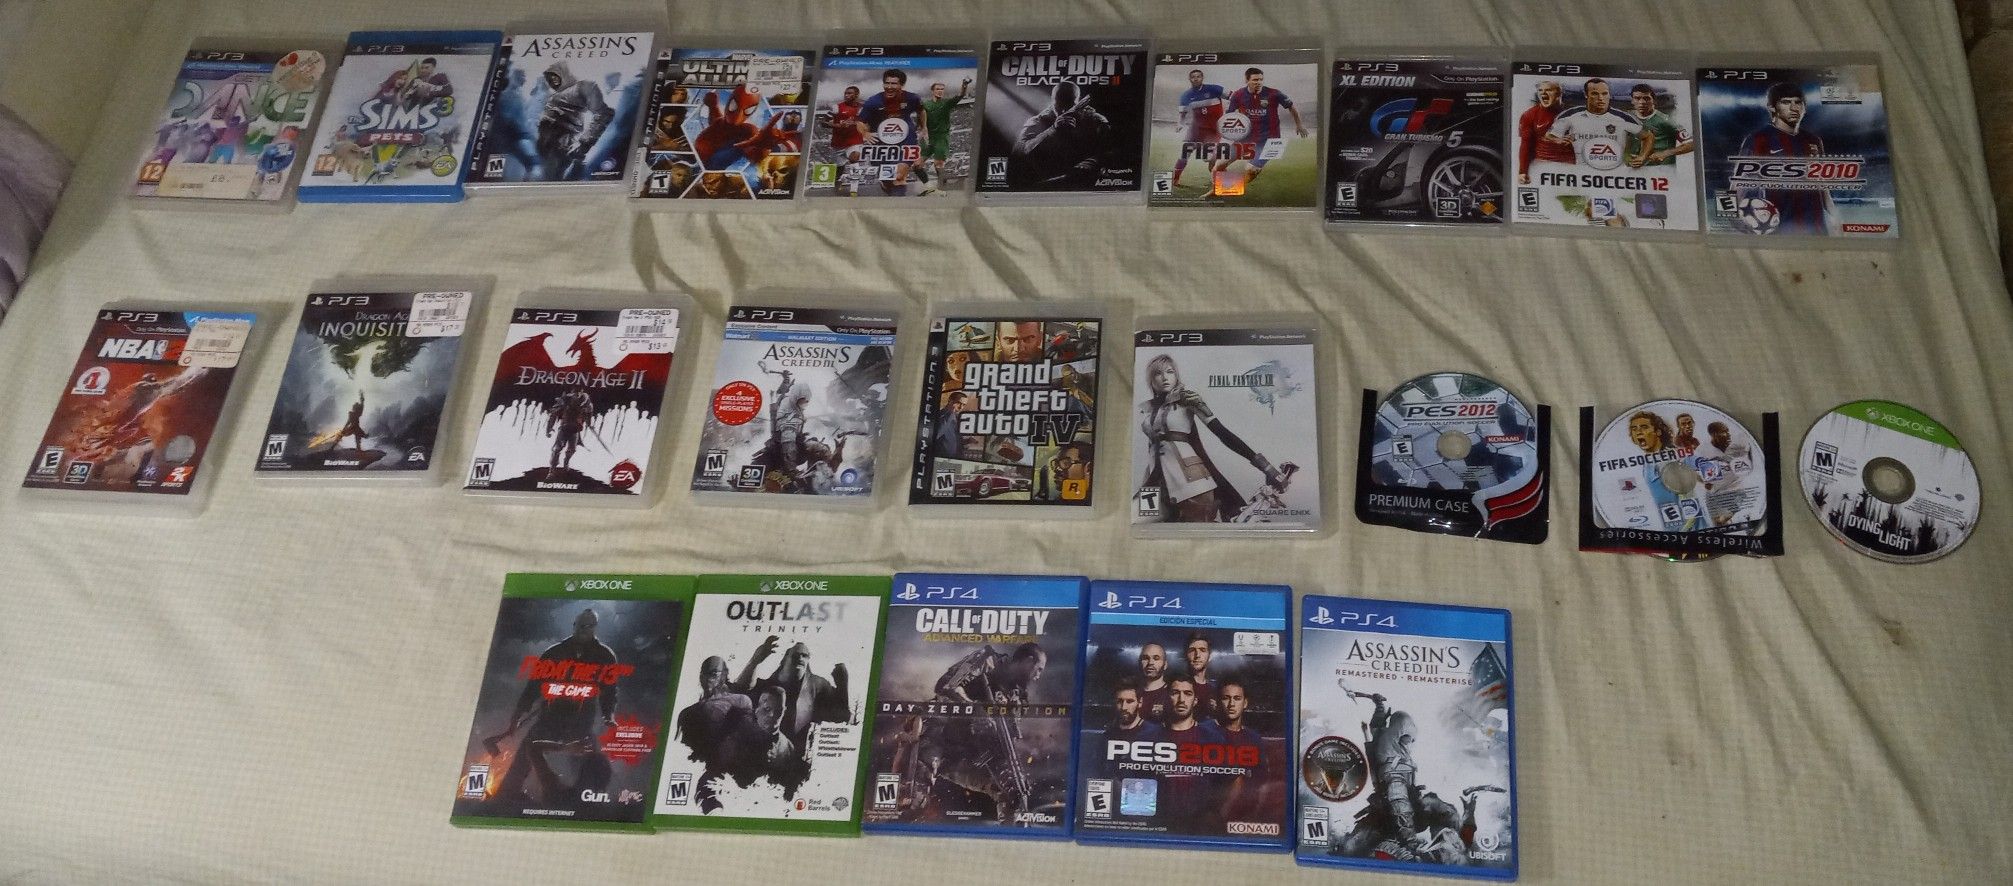 24 Games For Sale. 🎮 
18 Games For PS3. 🎮
3 Games For Xbox One. 🎮                                                   3 Games For PS4. 🎮